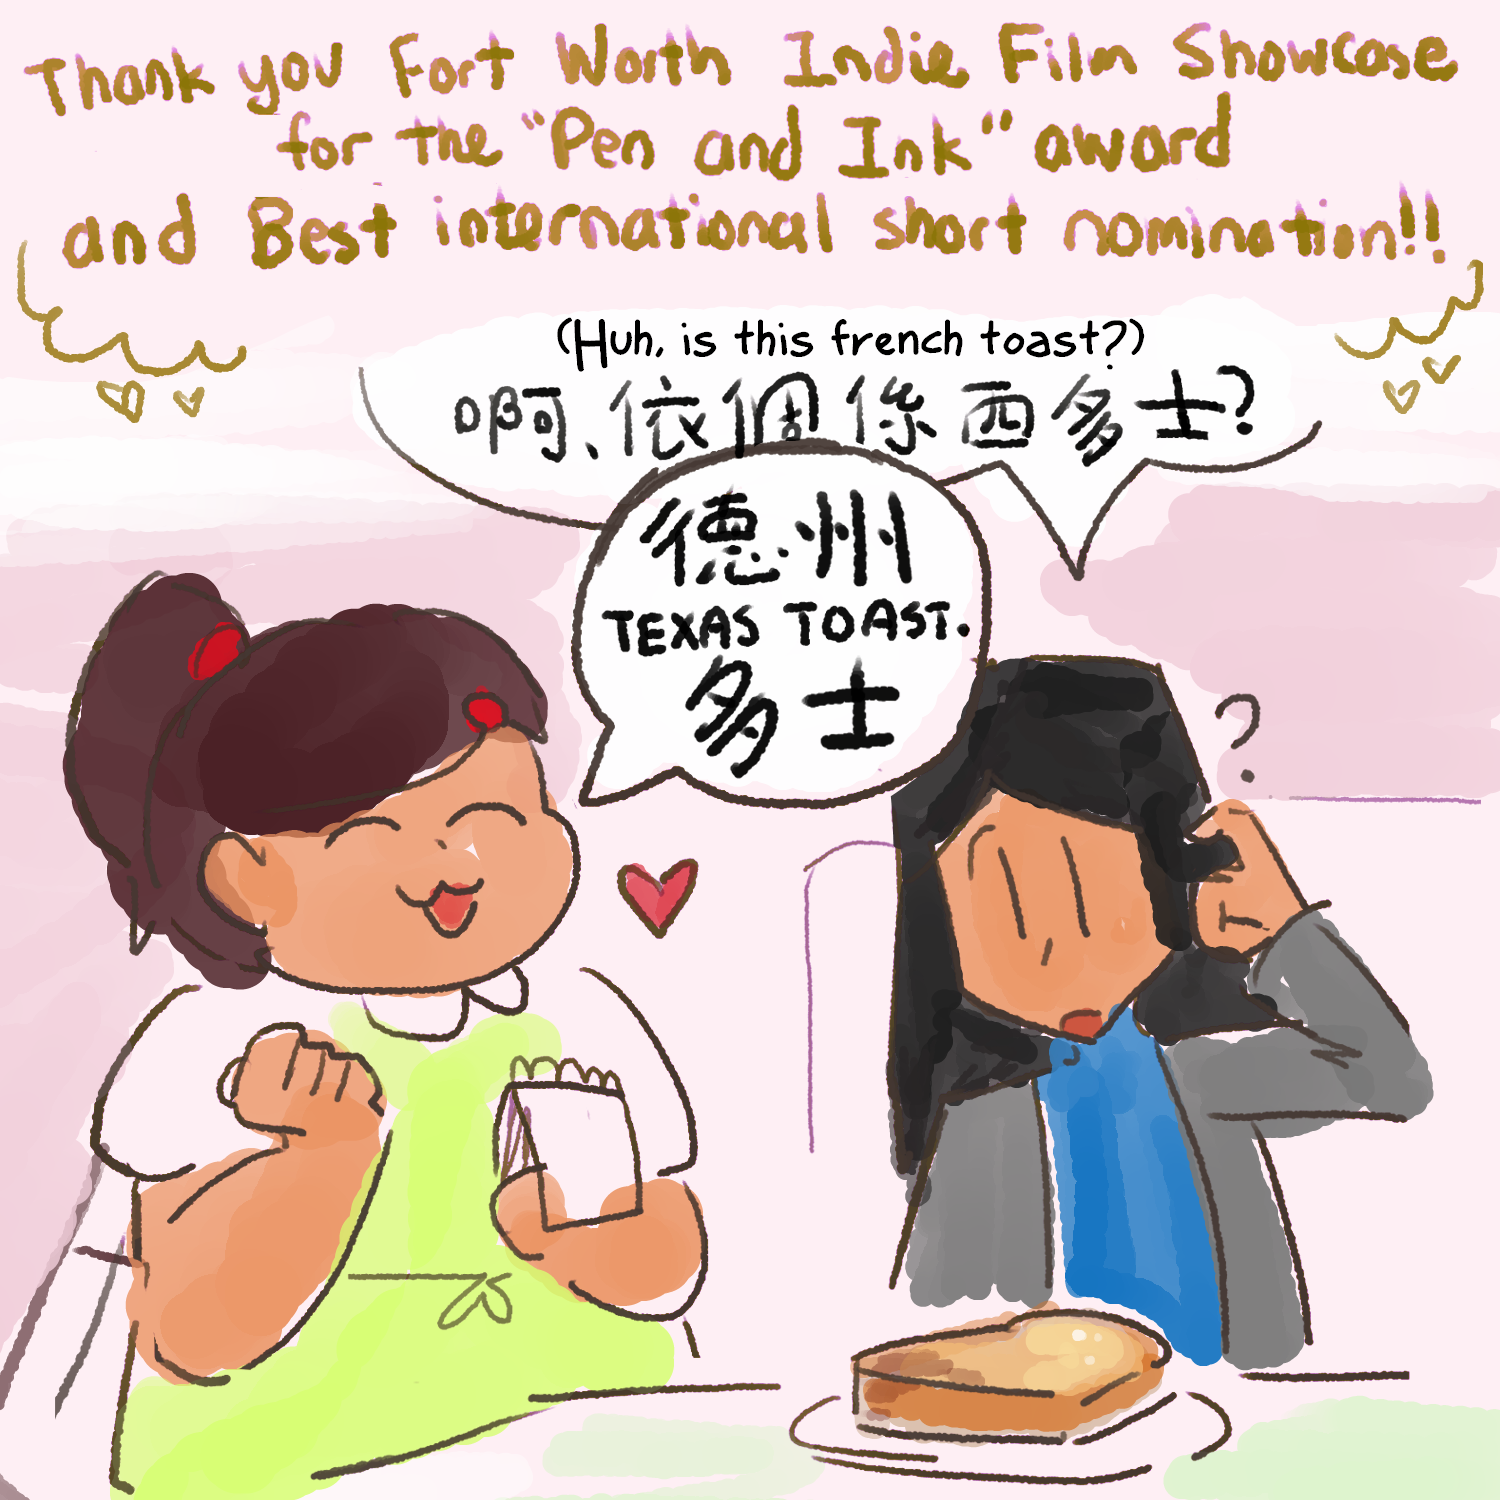 Doodle of characters from macaroni soup. Lady (Blue and gray outfit, long black hair) is scratching her head at a large slice of toast placed in front of her. She has a speech bubble above her head that says Chinese text as well as English translation, 'Huh, is this French toast?' Waitress (Green apron, ponytail with red accents) cutely reply to her question. Her speech bubble has chinese as well, with english text 'Texas toast.' The above caption says thank you Fort Worth indie film showcase for the 'Pen and Ink' award and Best international short nomination!!